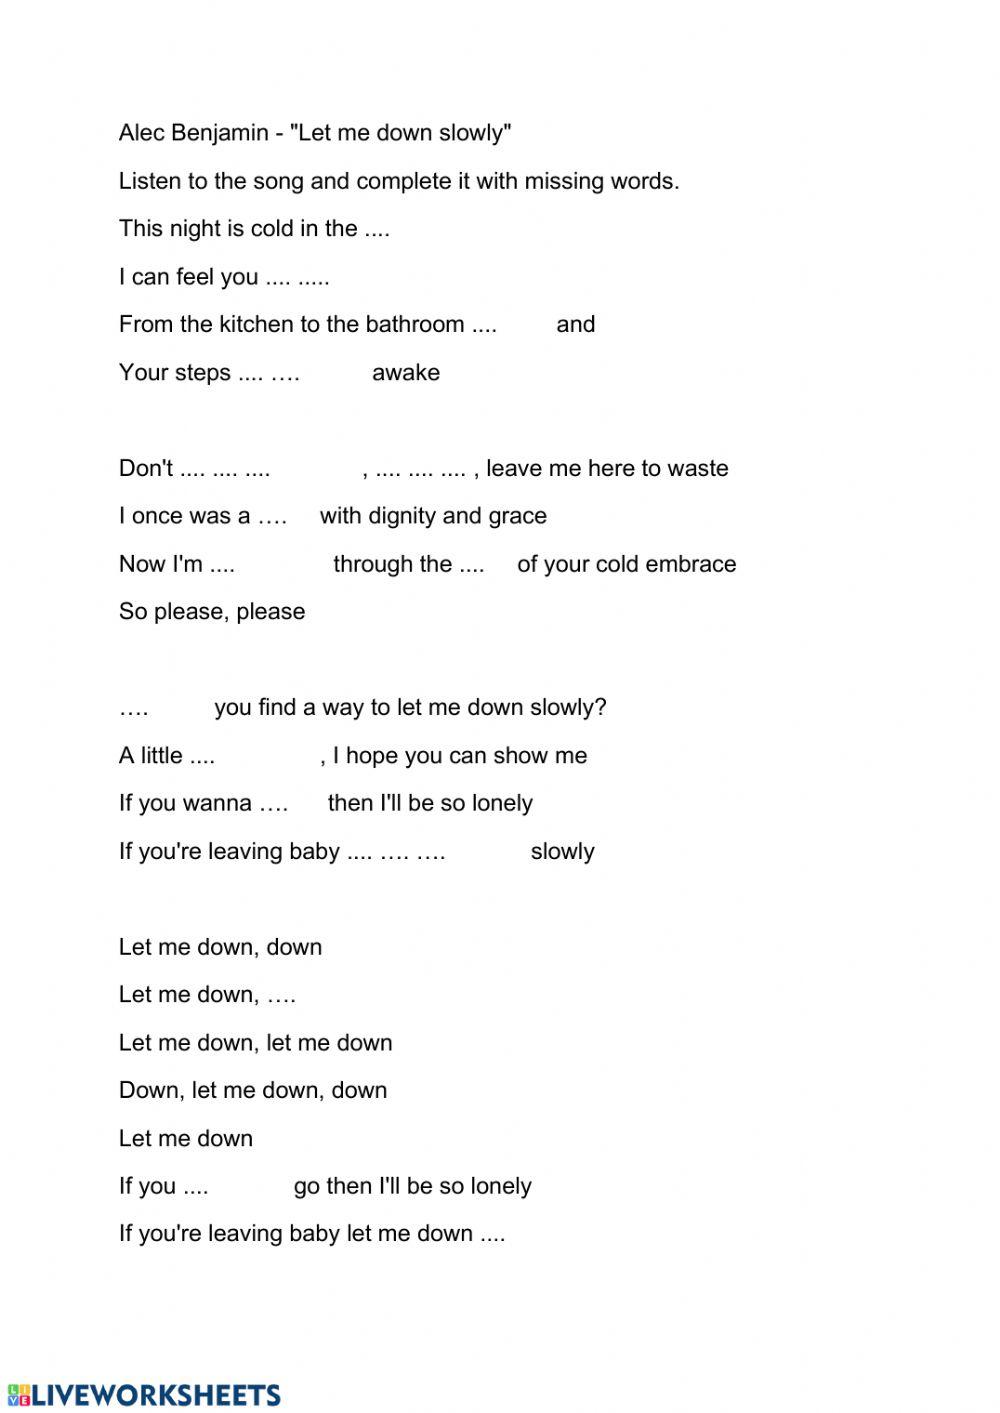 Song online exercise for Intermediate | Live Worksheets